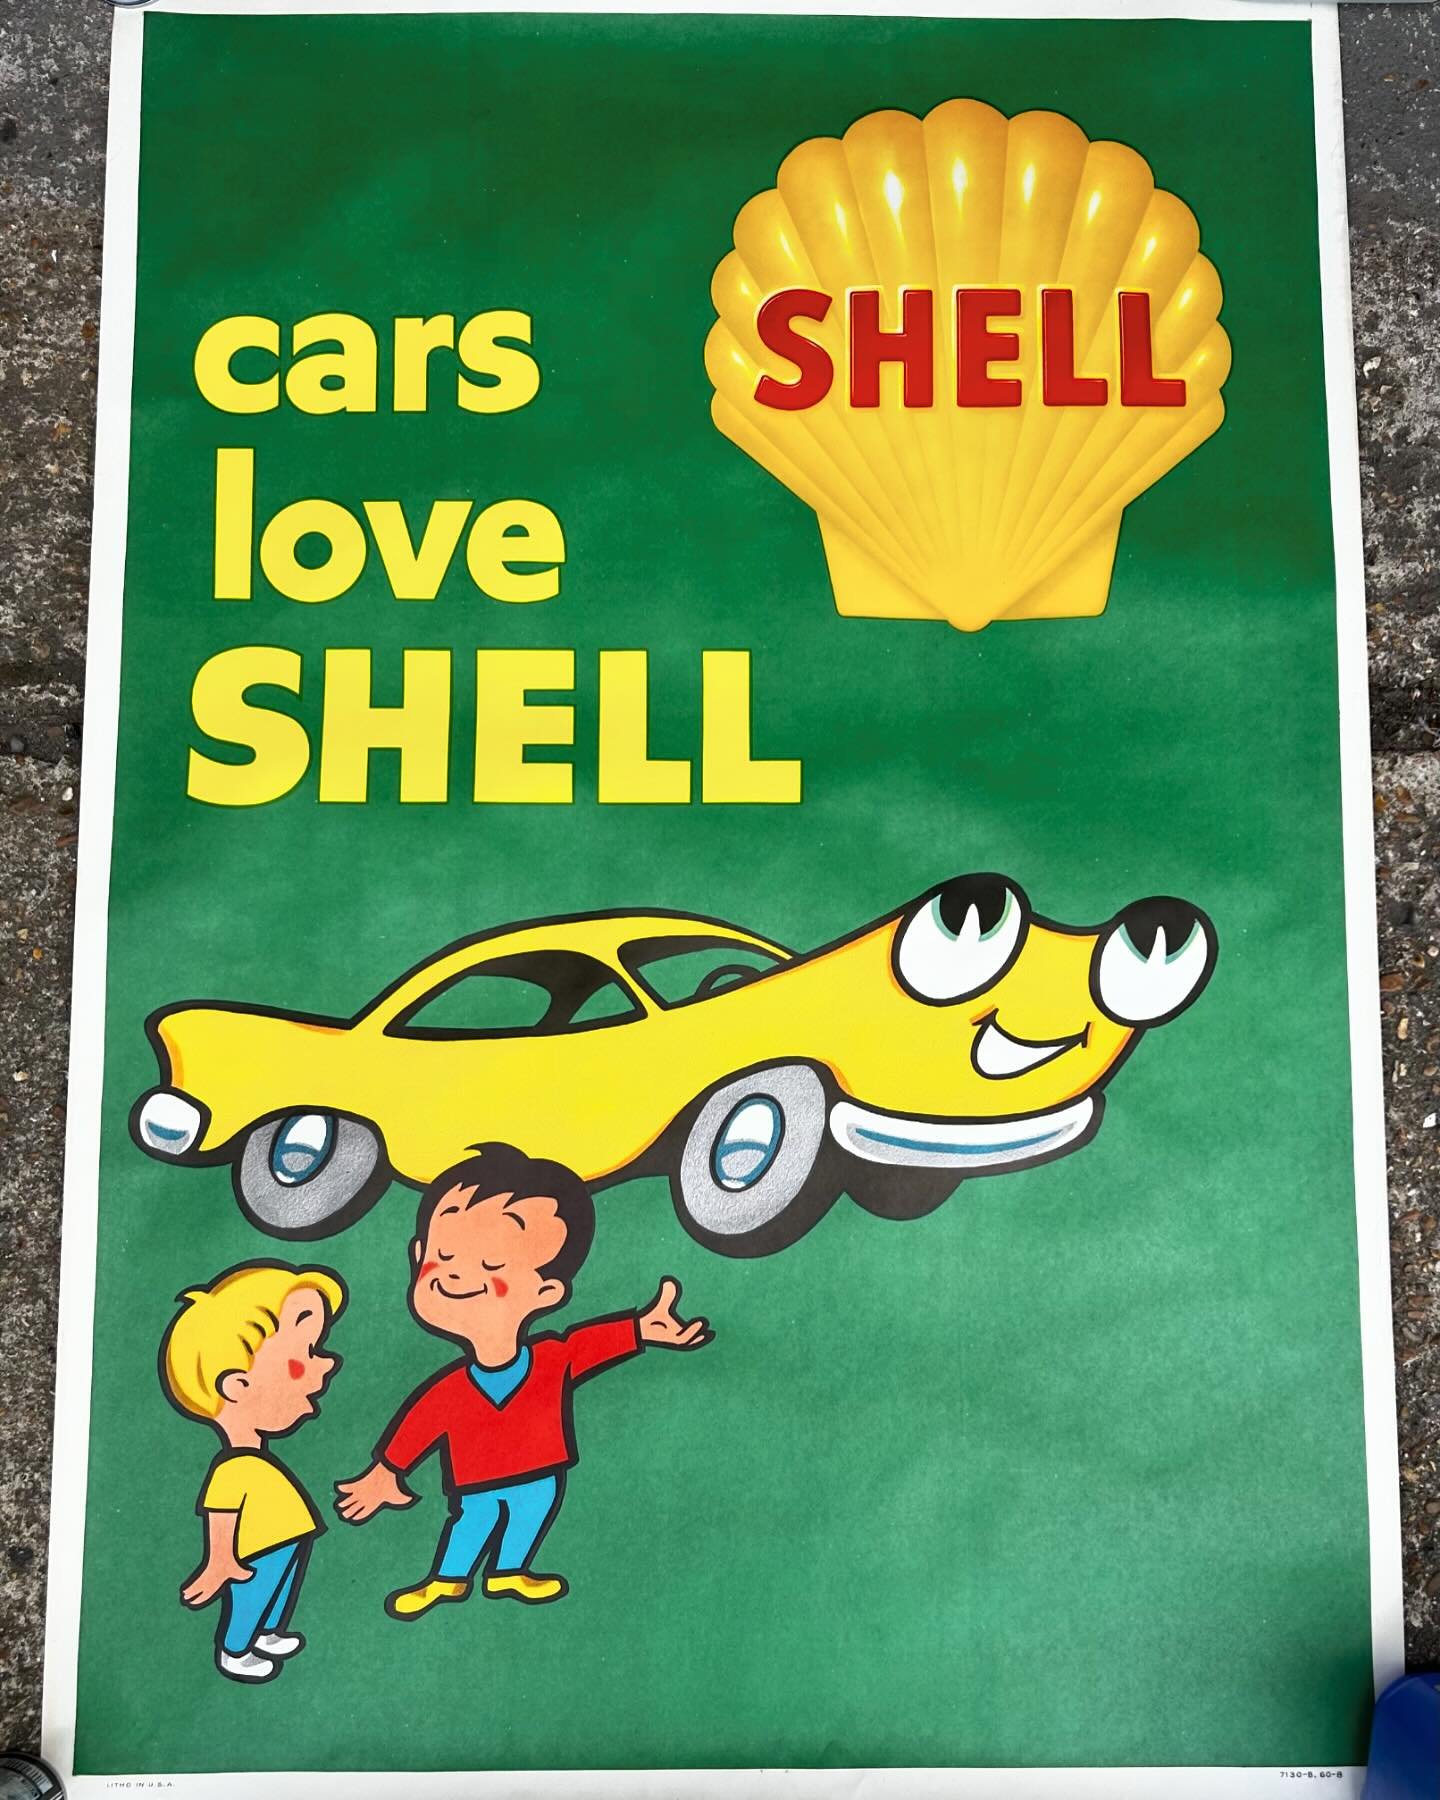 Original Shell advertising poster from 1960, perfect condition and lovely colours 
Available now

#vintage#vintageadvertising #gasandoil #gasandoilcollectibles #shelloil #shellcollector #shellpetroleum #gasandoilsigns #classiccars #oldcar#gasstation 